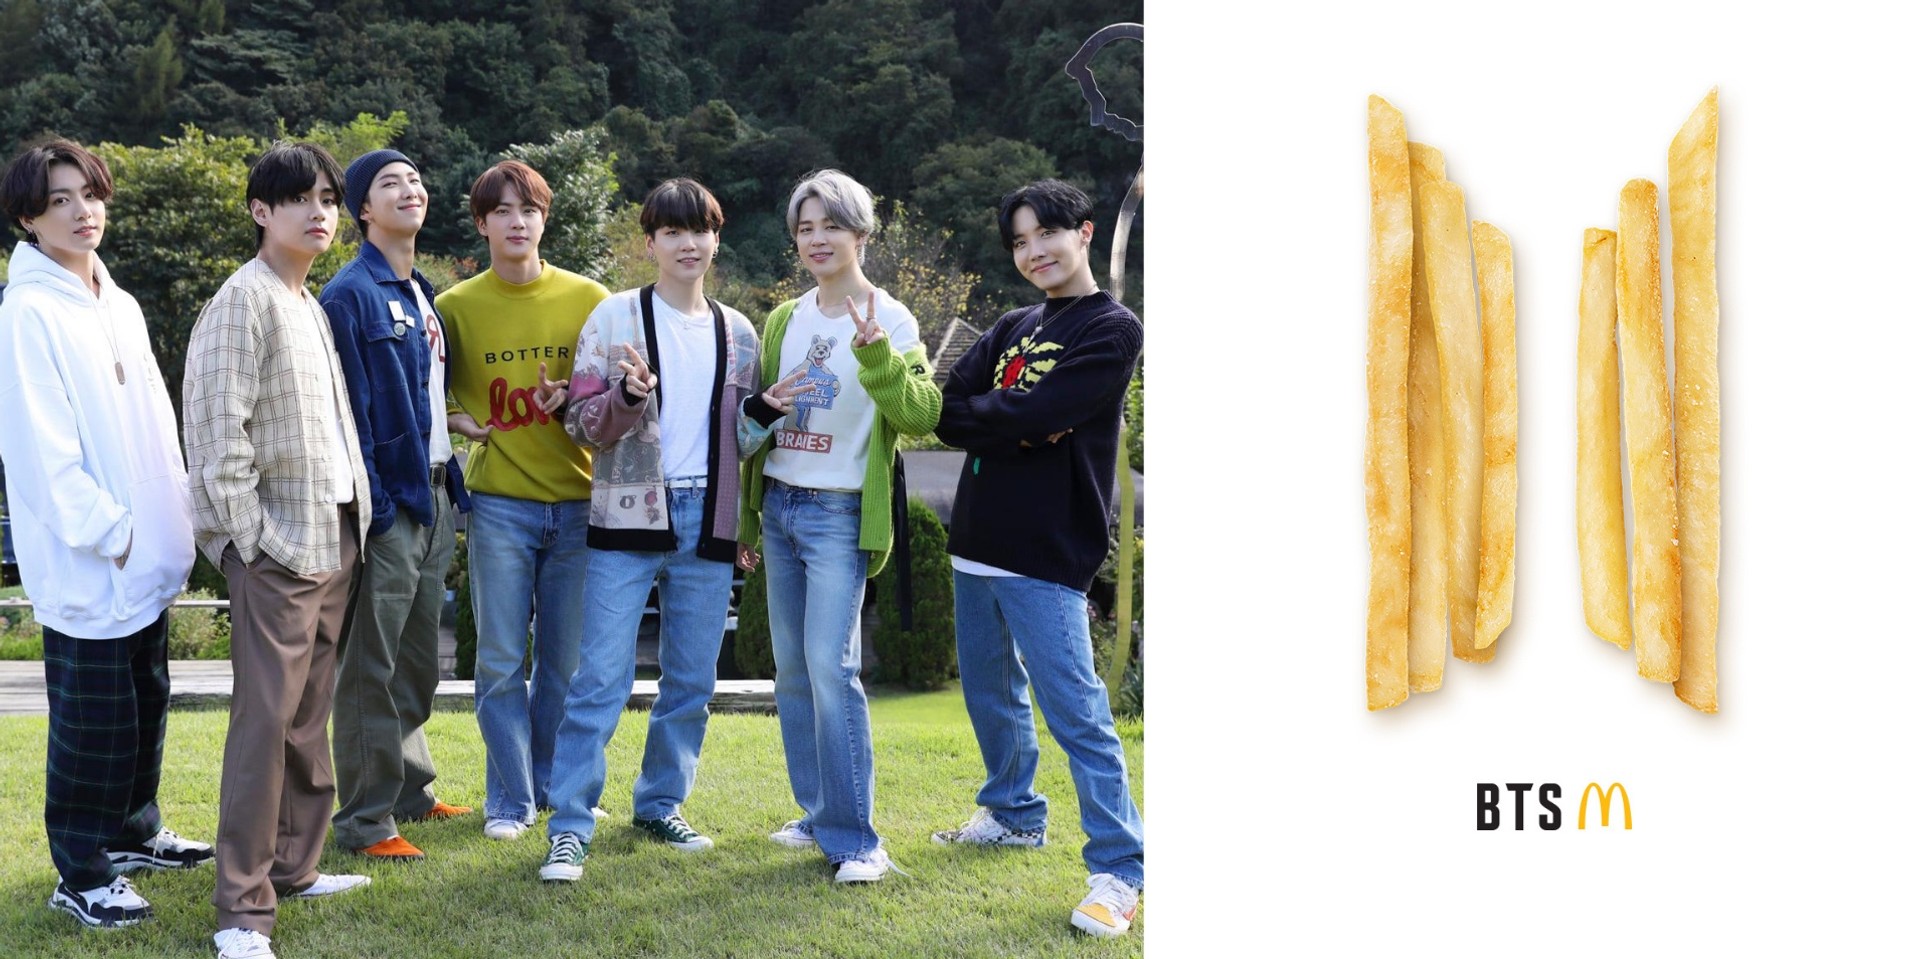 The bts meal malaysia